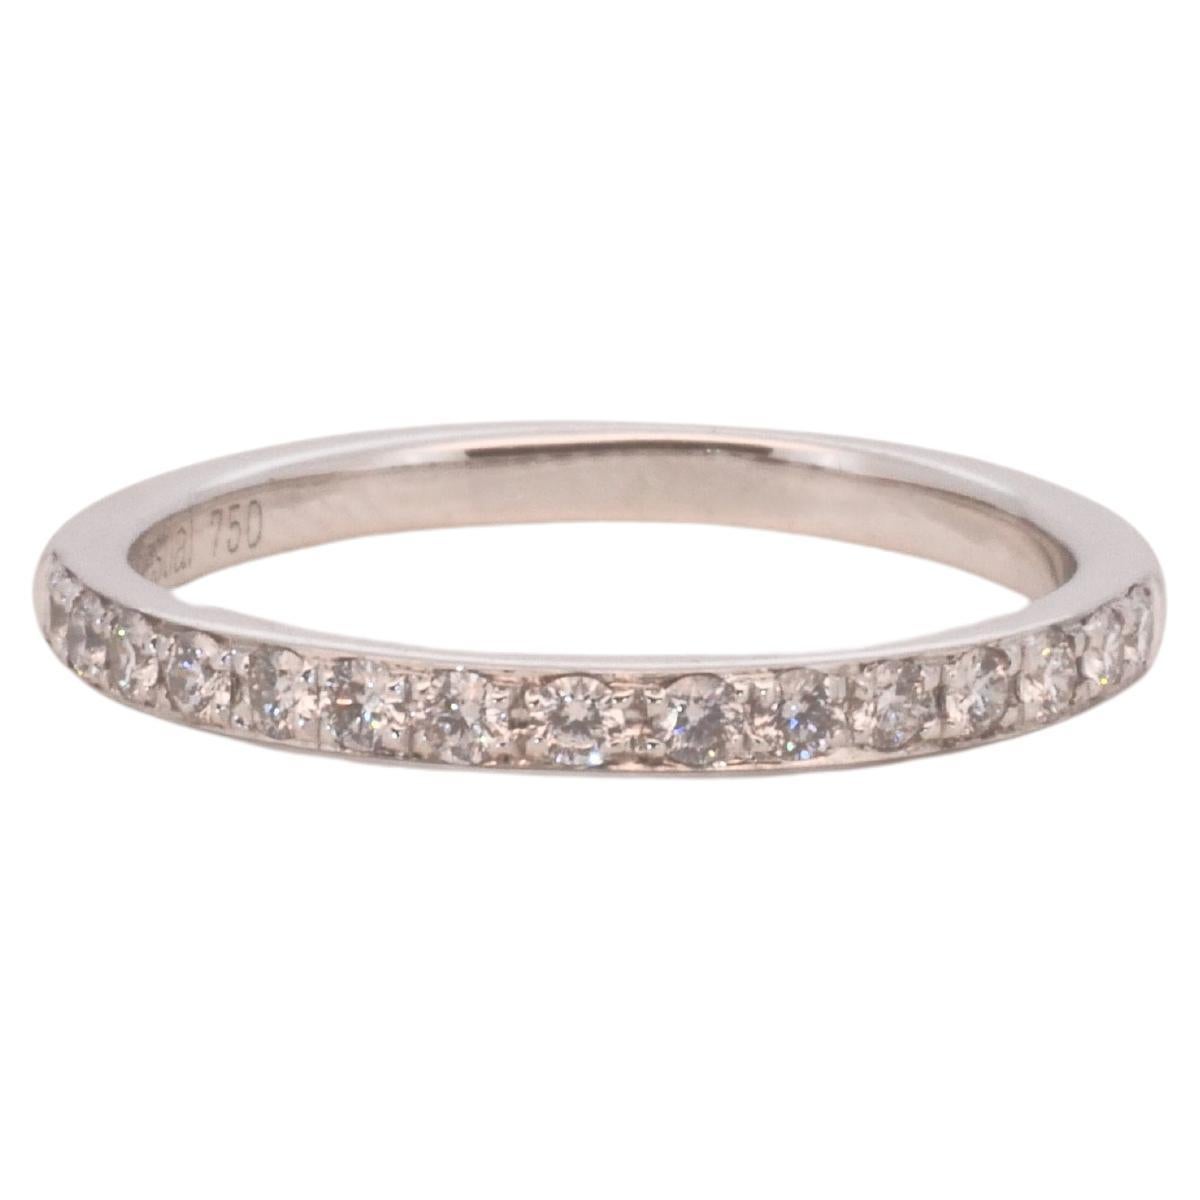 Beautiful 18k White Gold Pave Thin Band Ring with 0.16 Carat Natural Diamonds